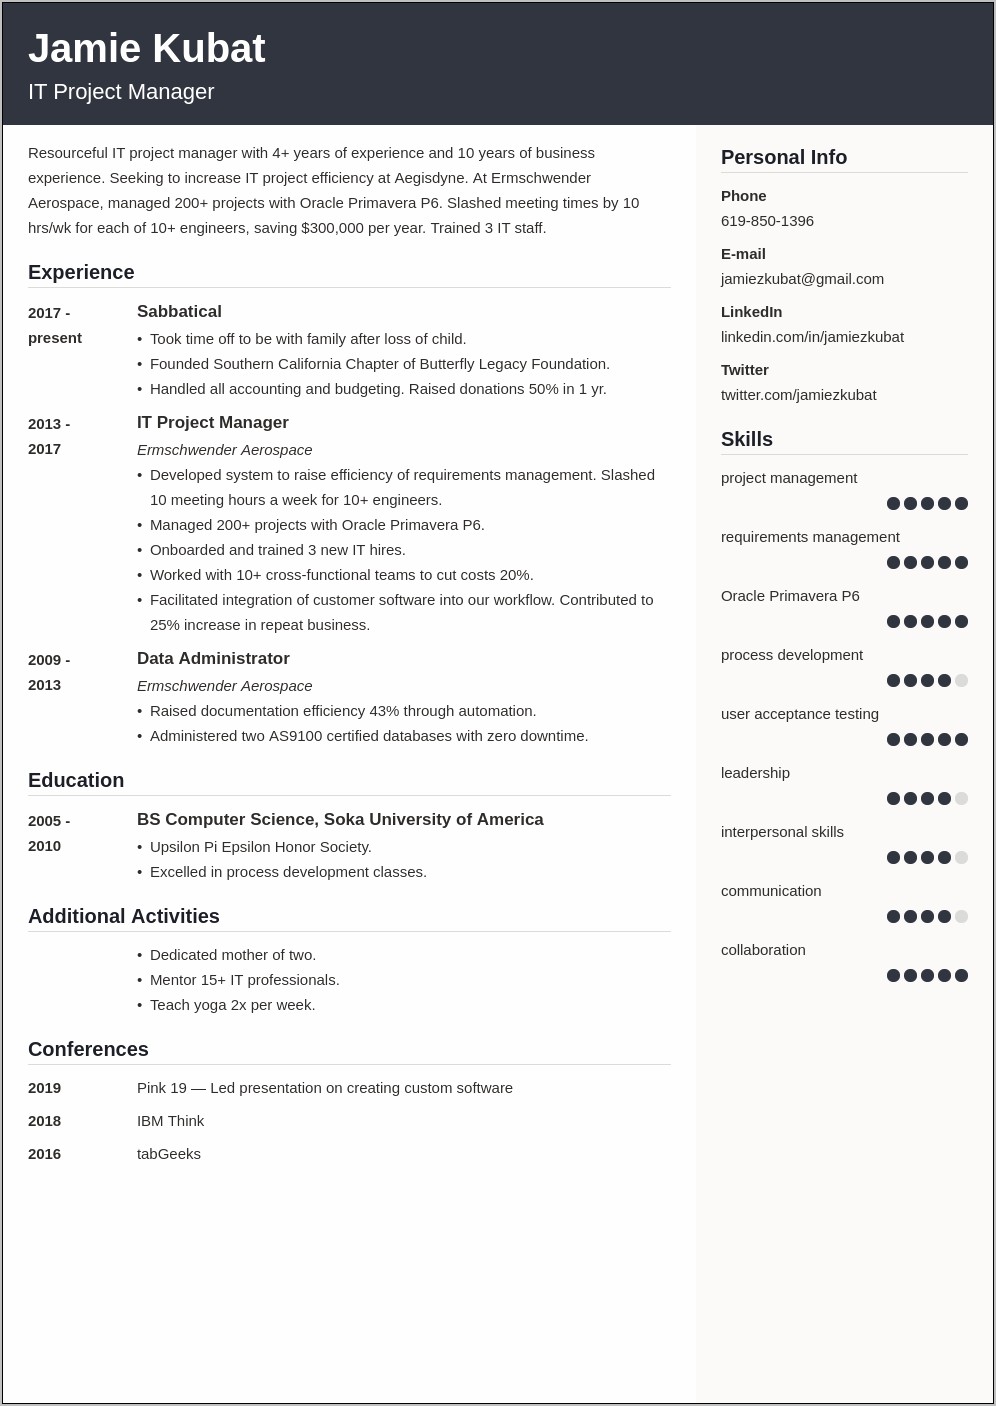 Best Resume To Use With Gaps In Employment